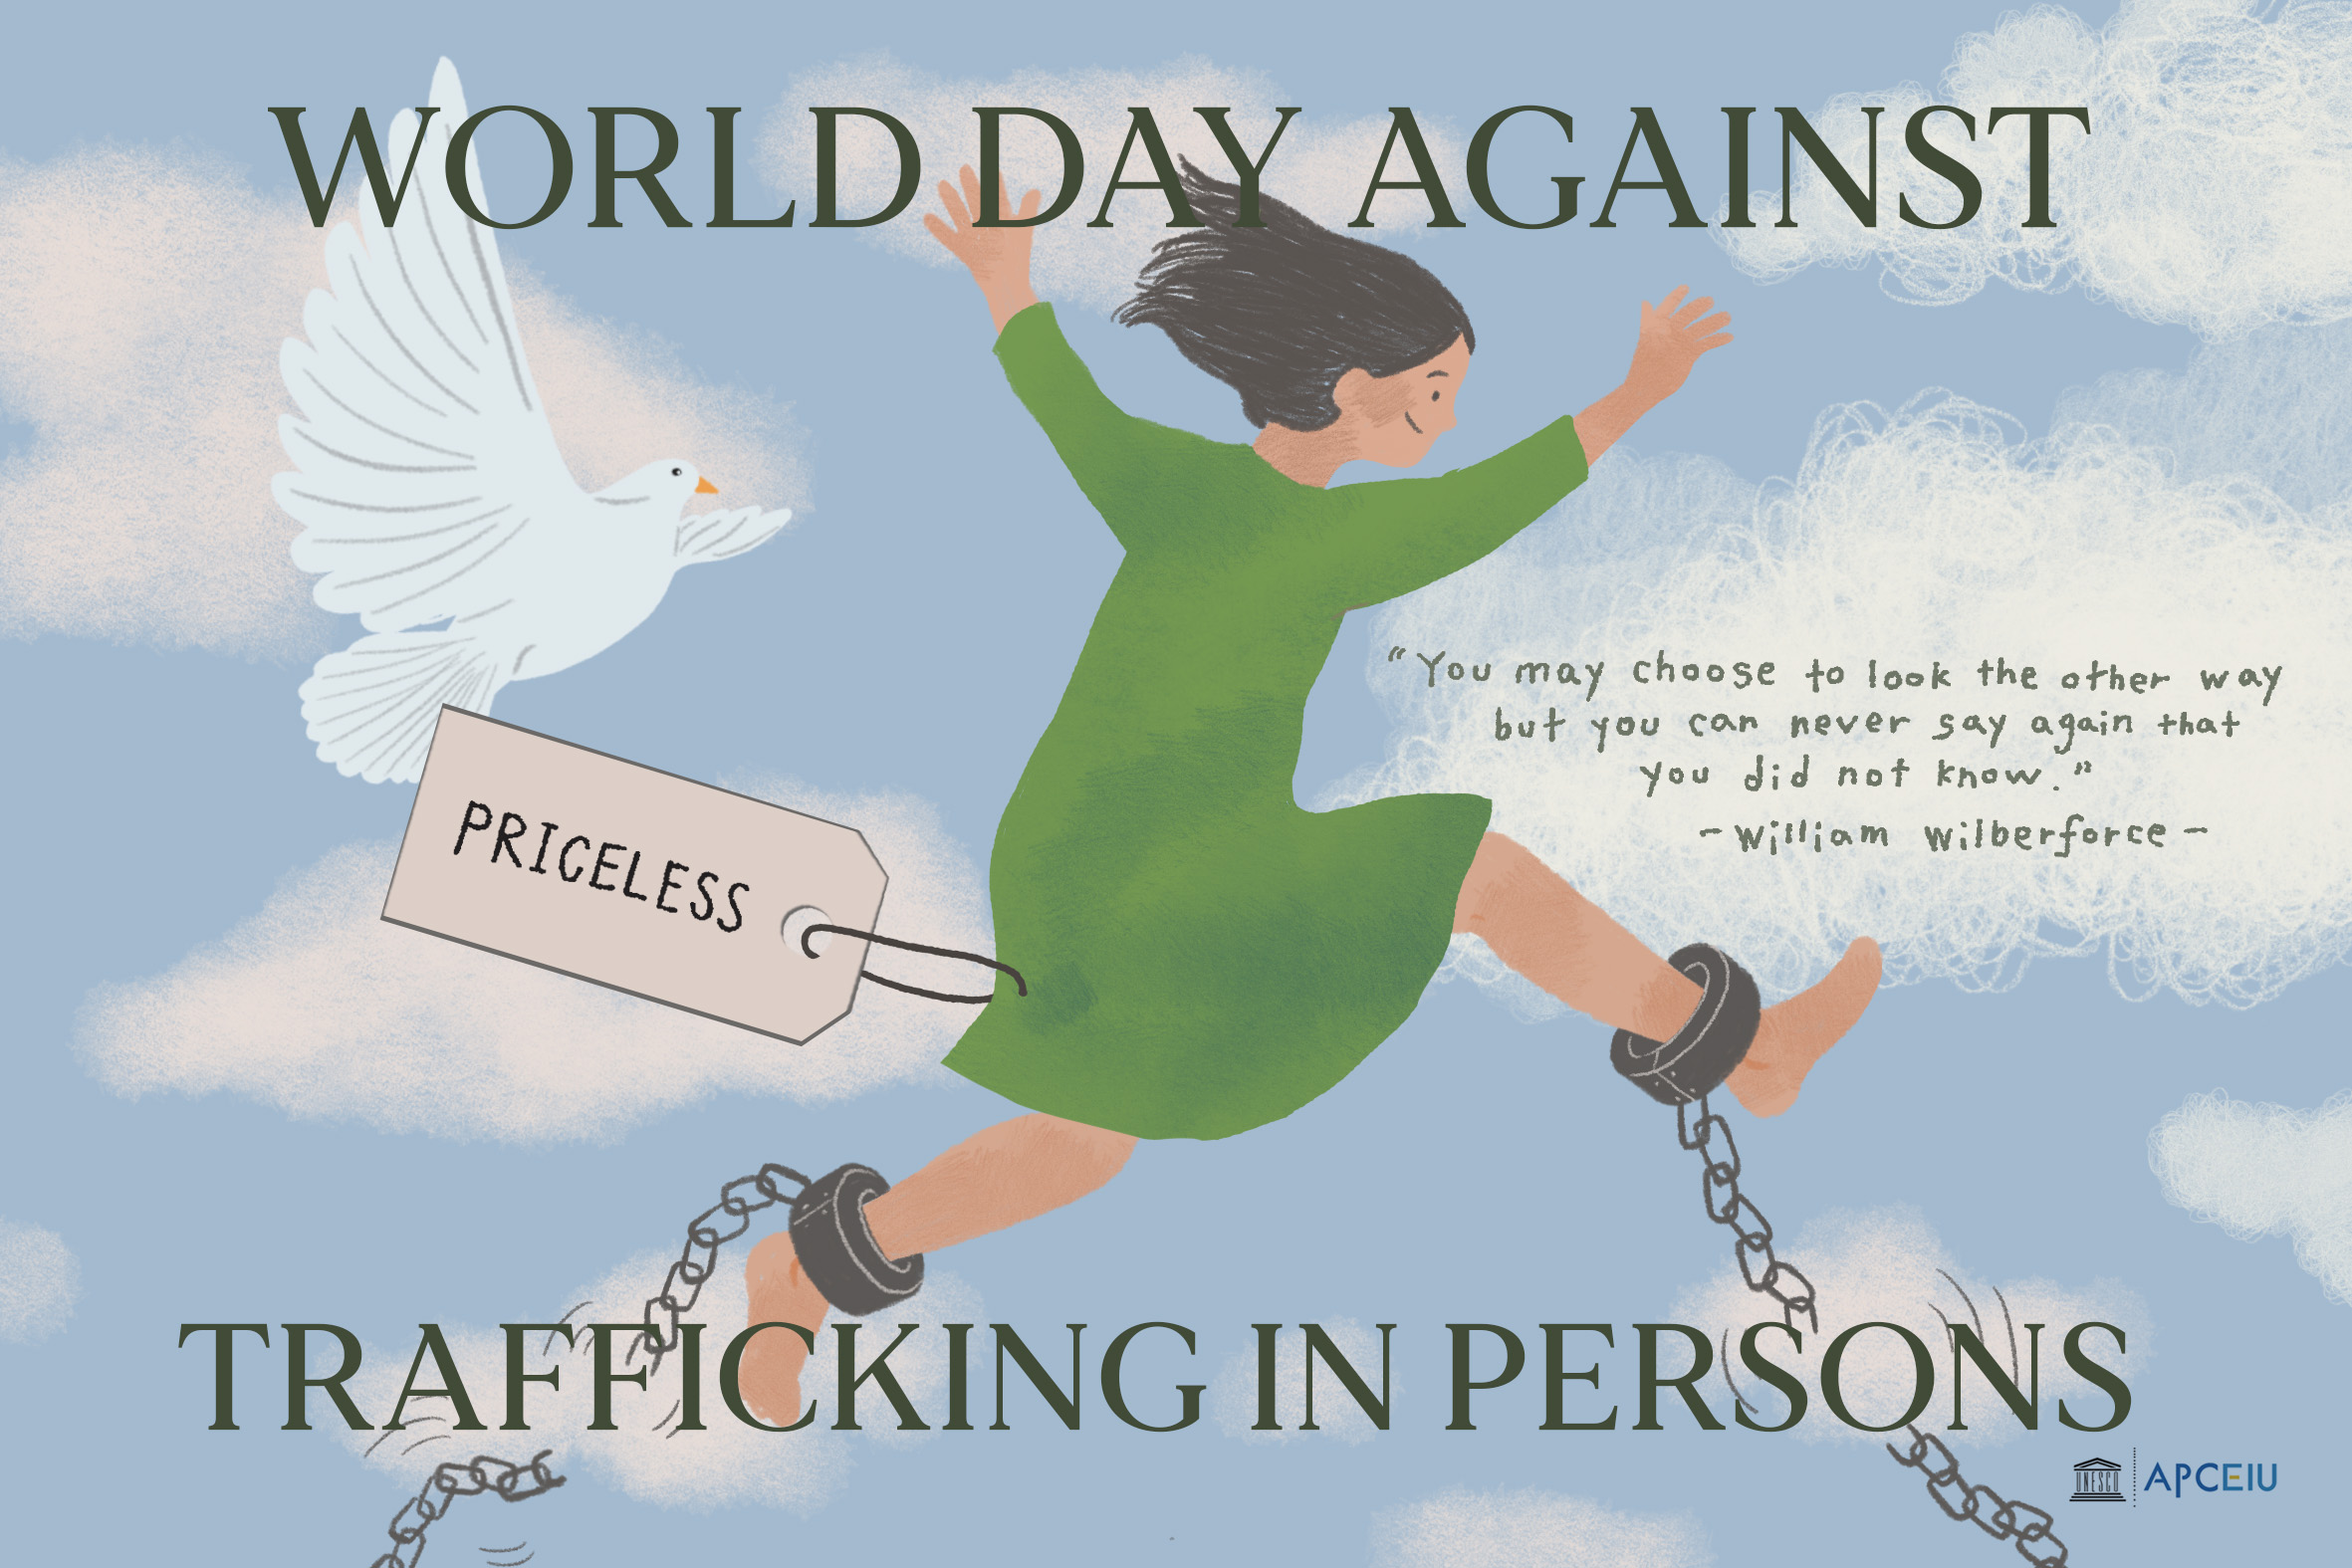 World Day Against Trafficking in Persons Illustration.jpg